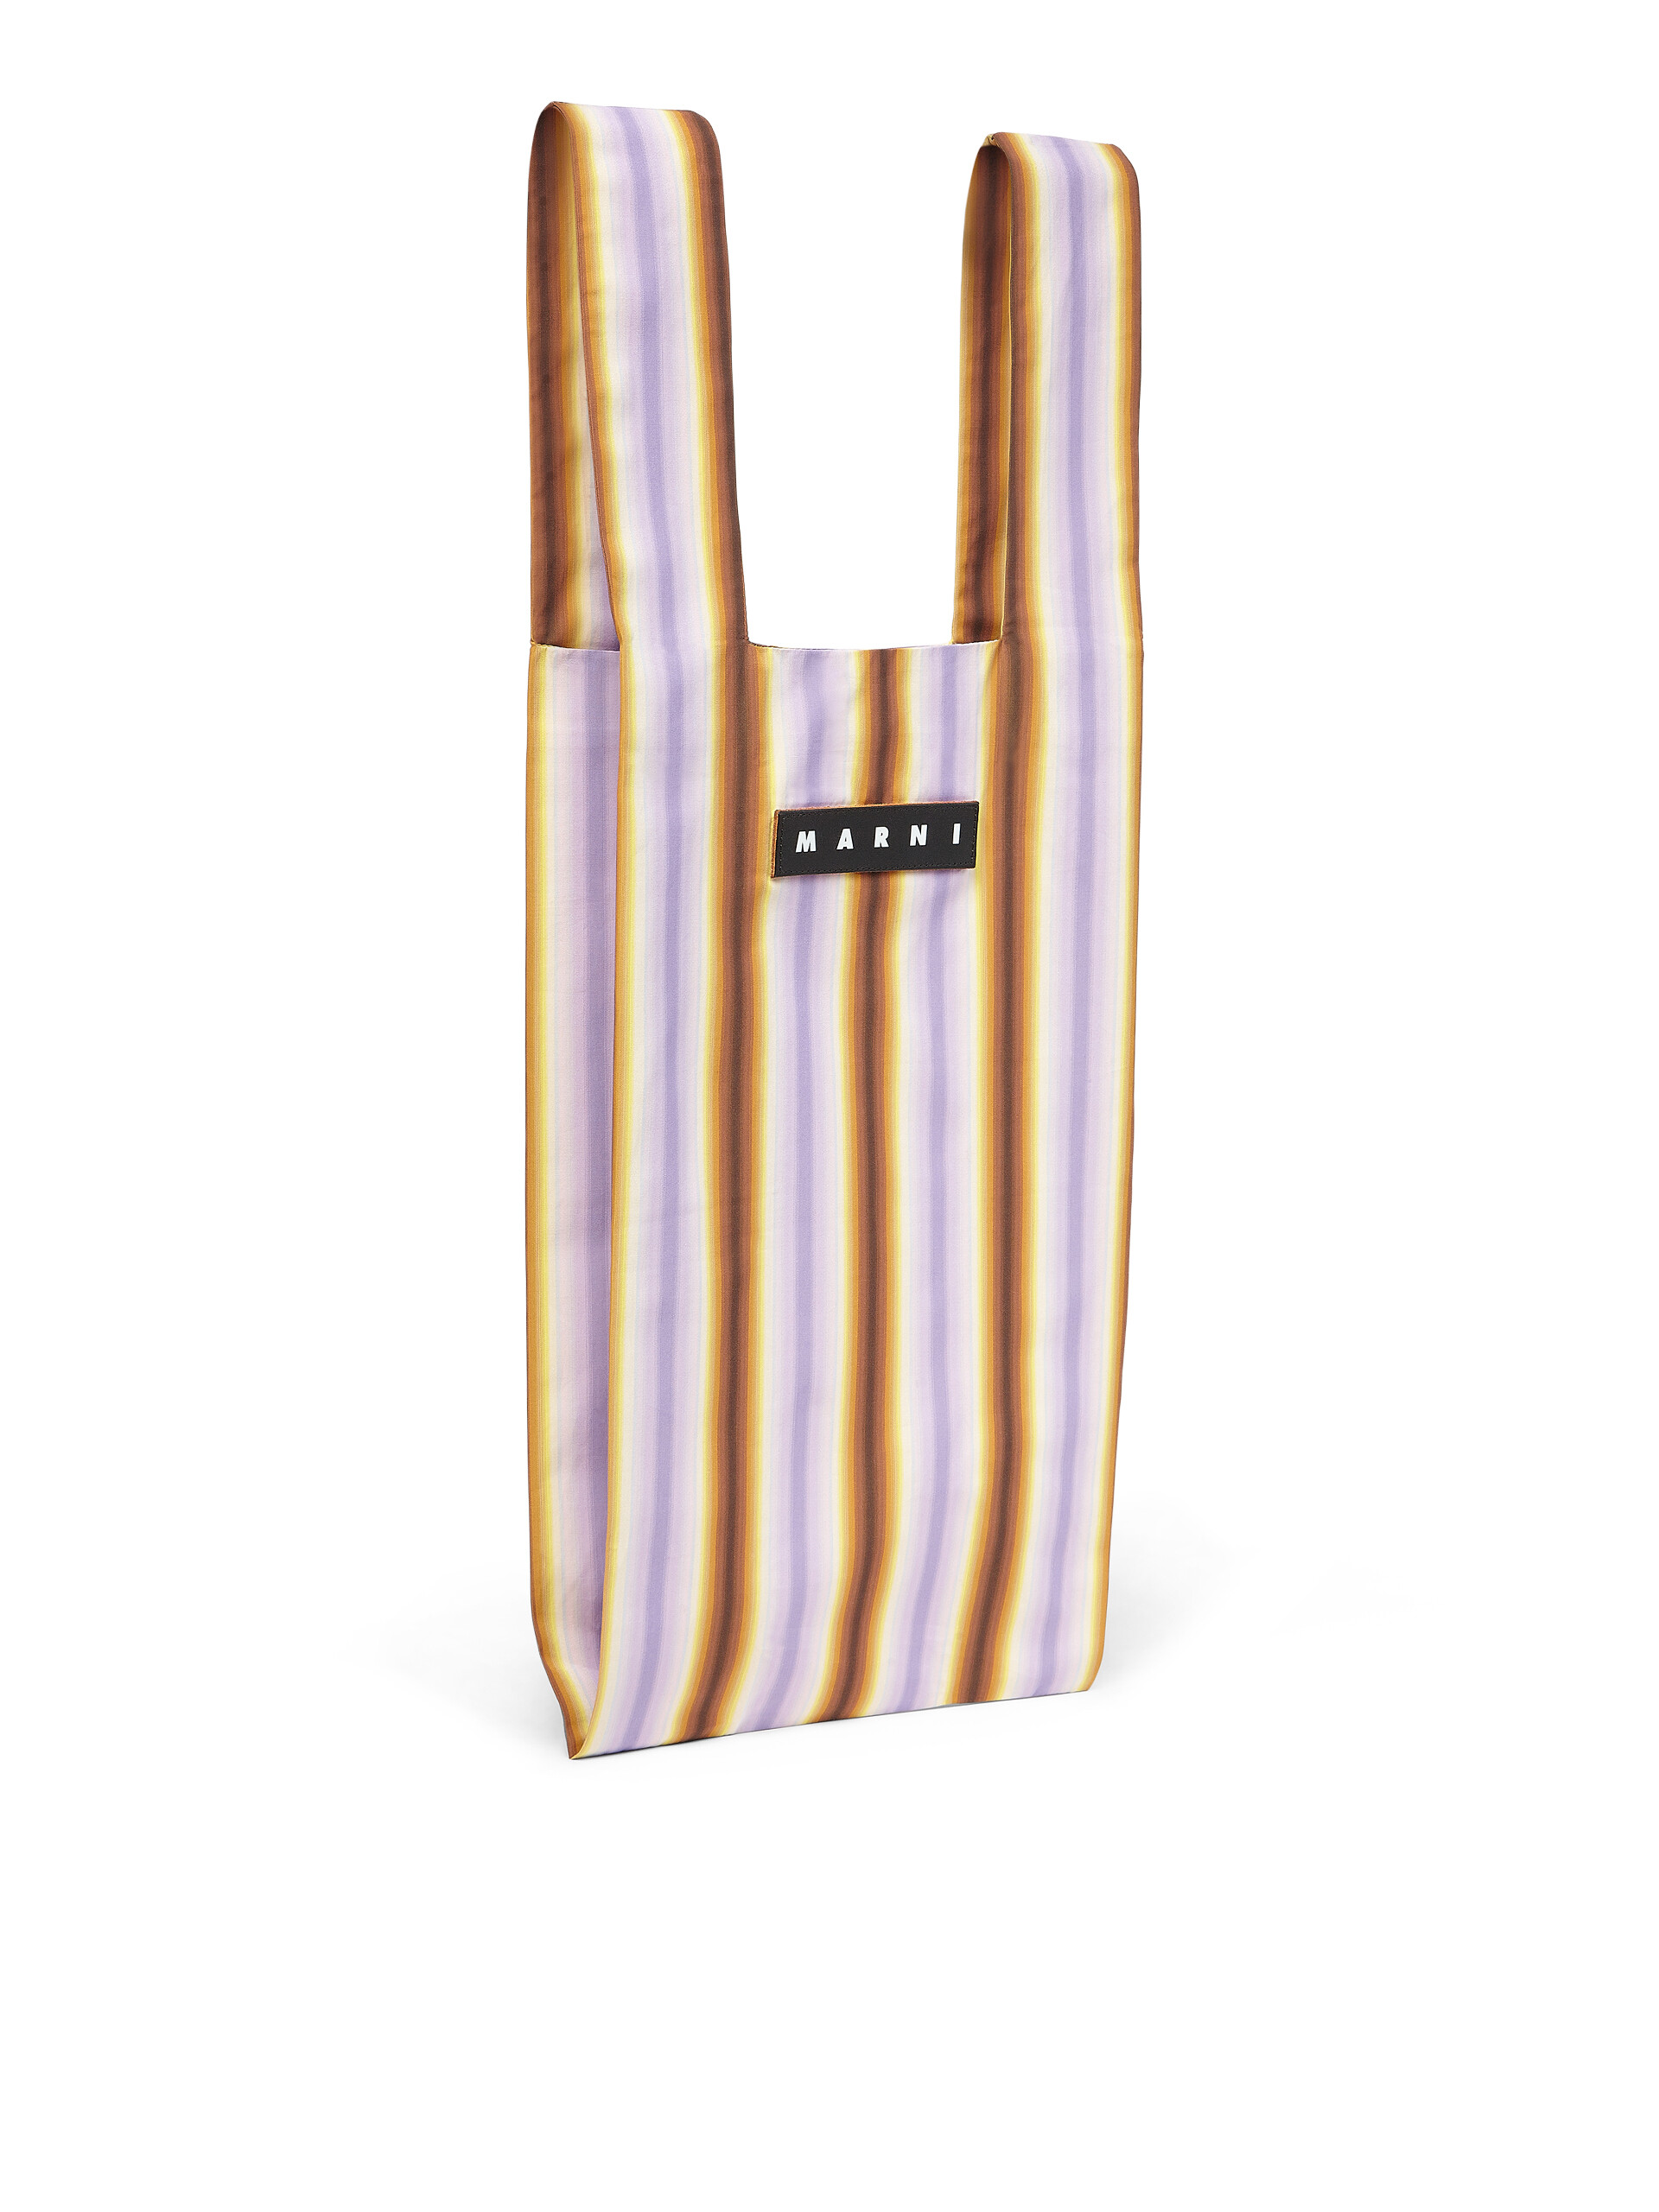 MARNI MARKET cotton shopping bag with pink and orange stripes - Shopping Bags - Image 2